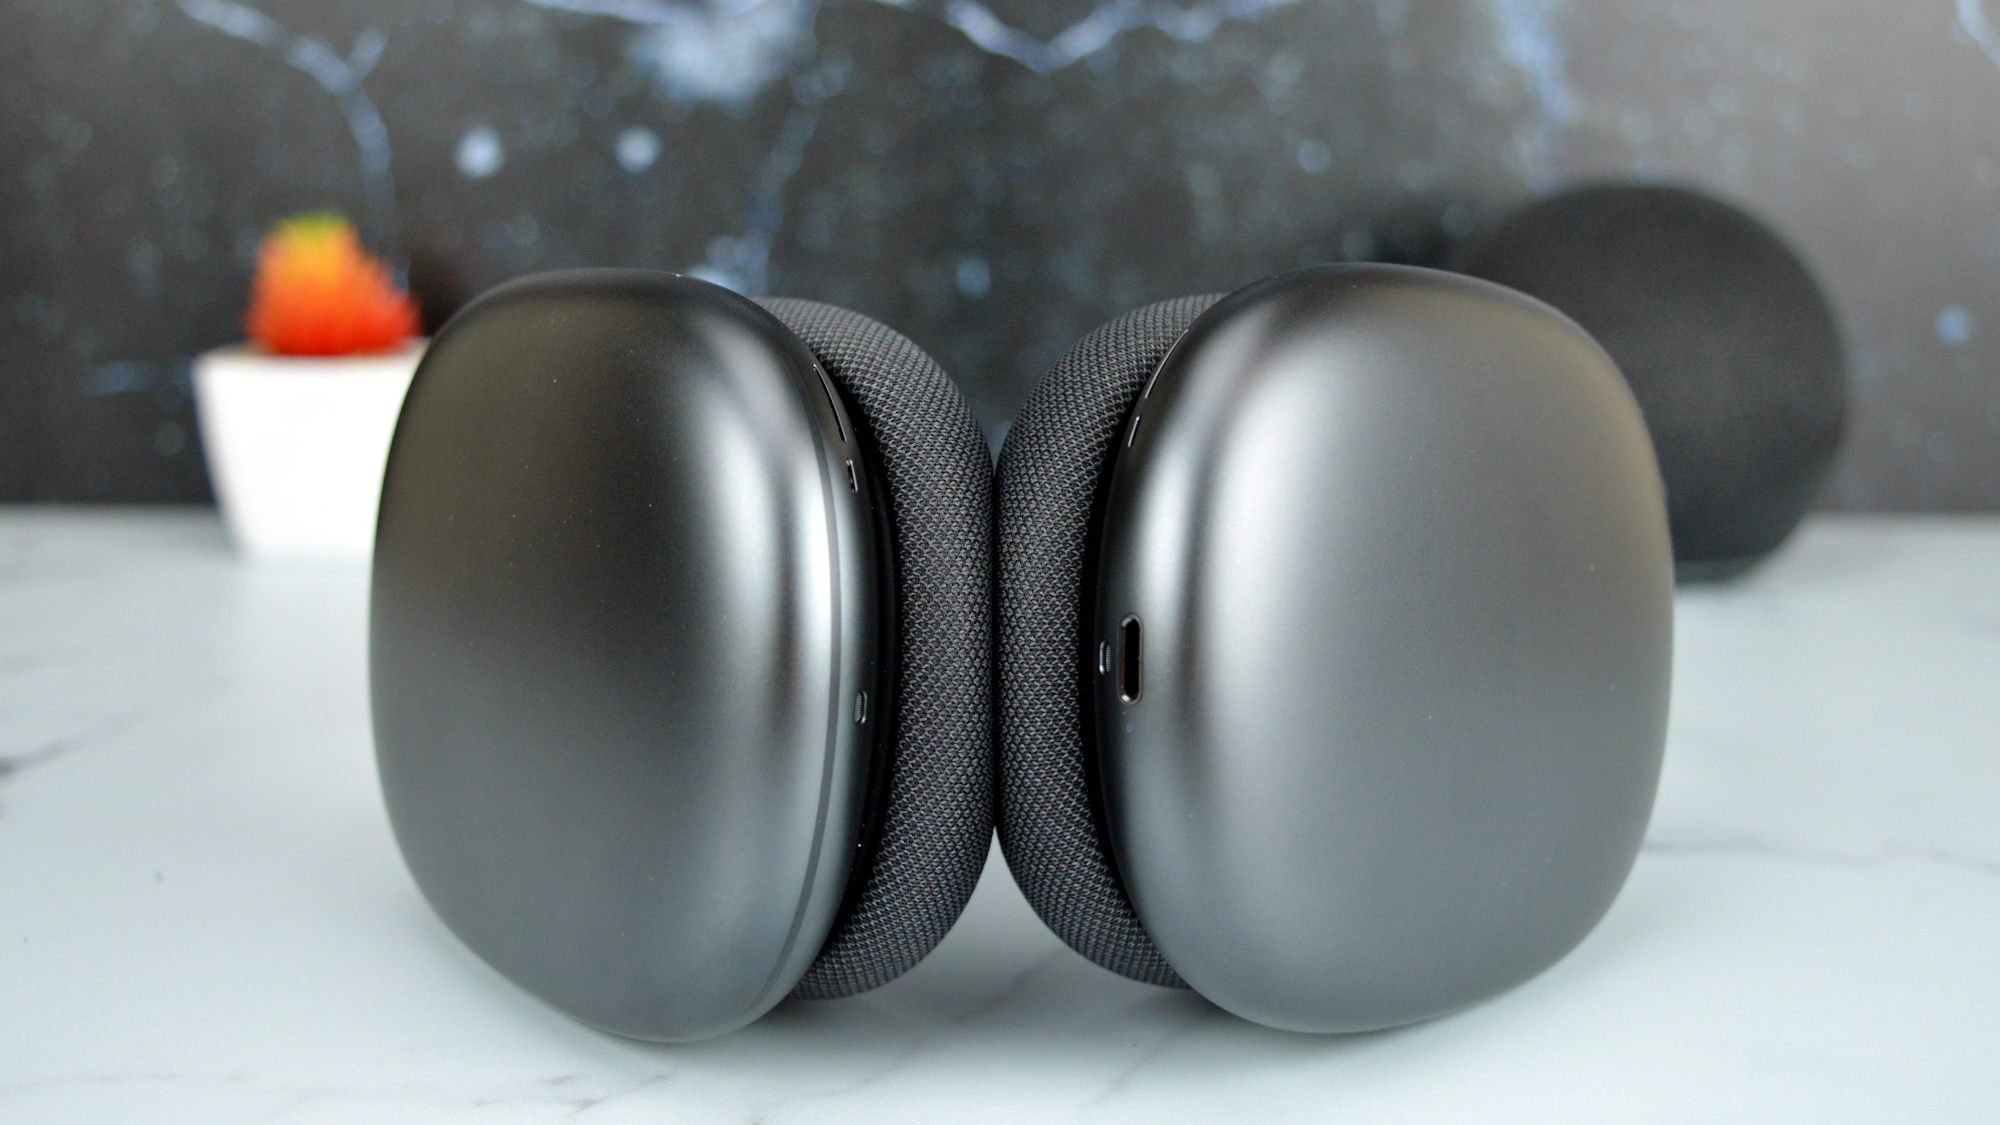 Apple AirPods Max review: luxurious sound for a luxury price - The Verge